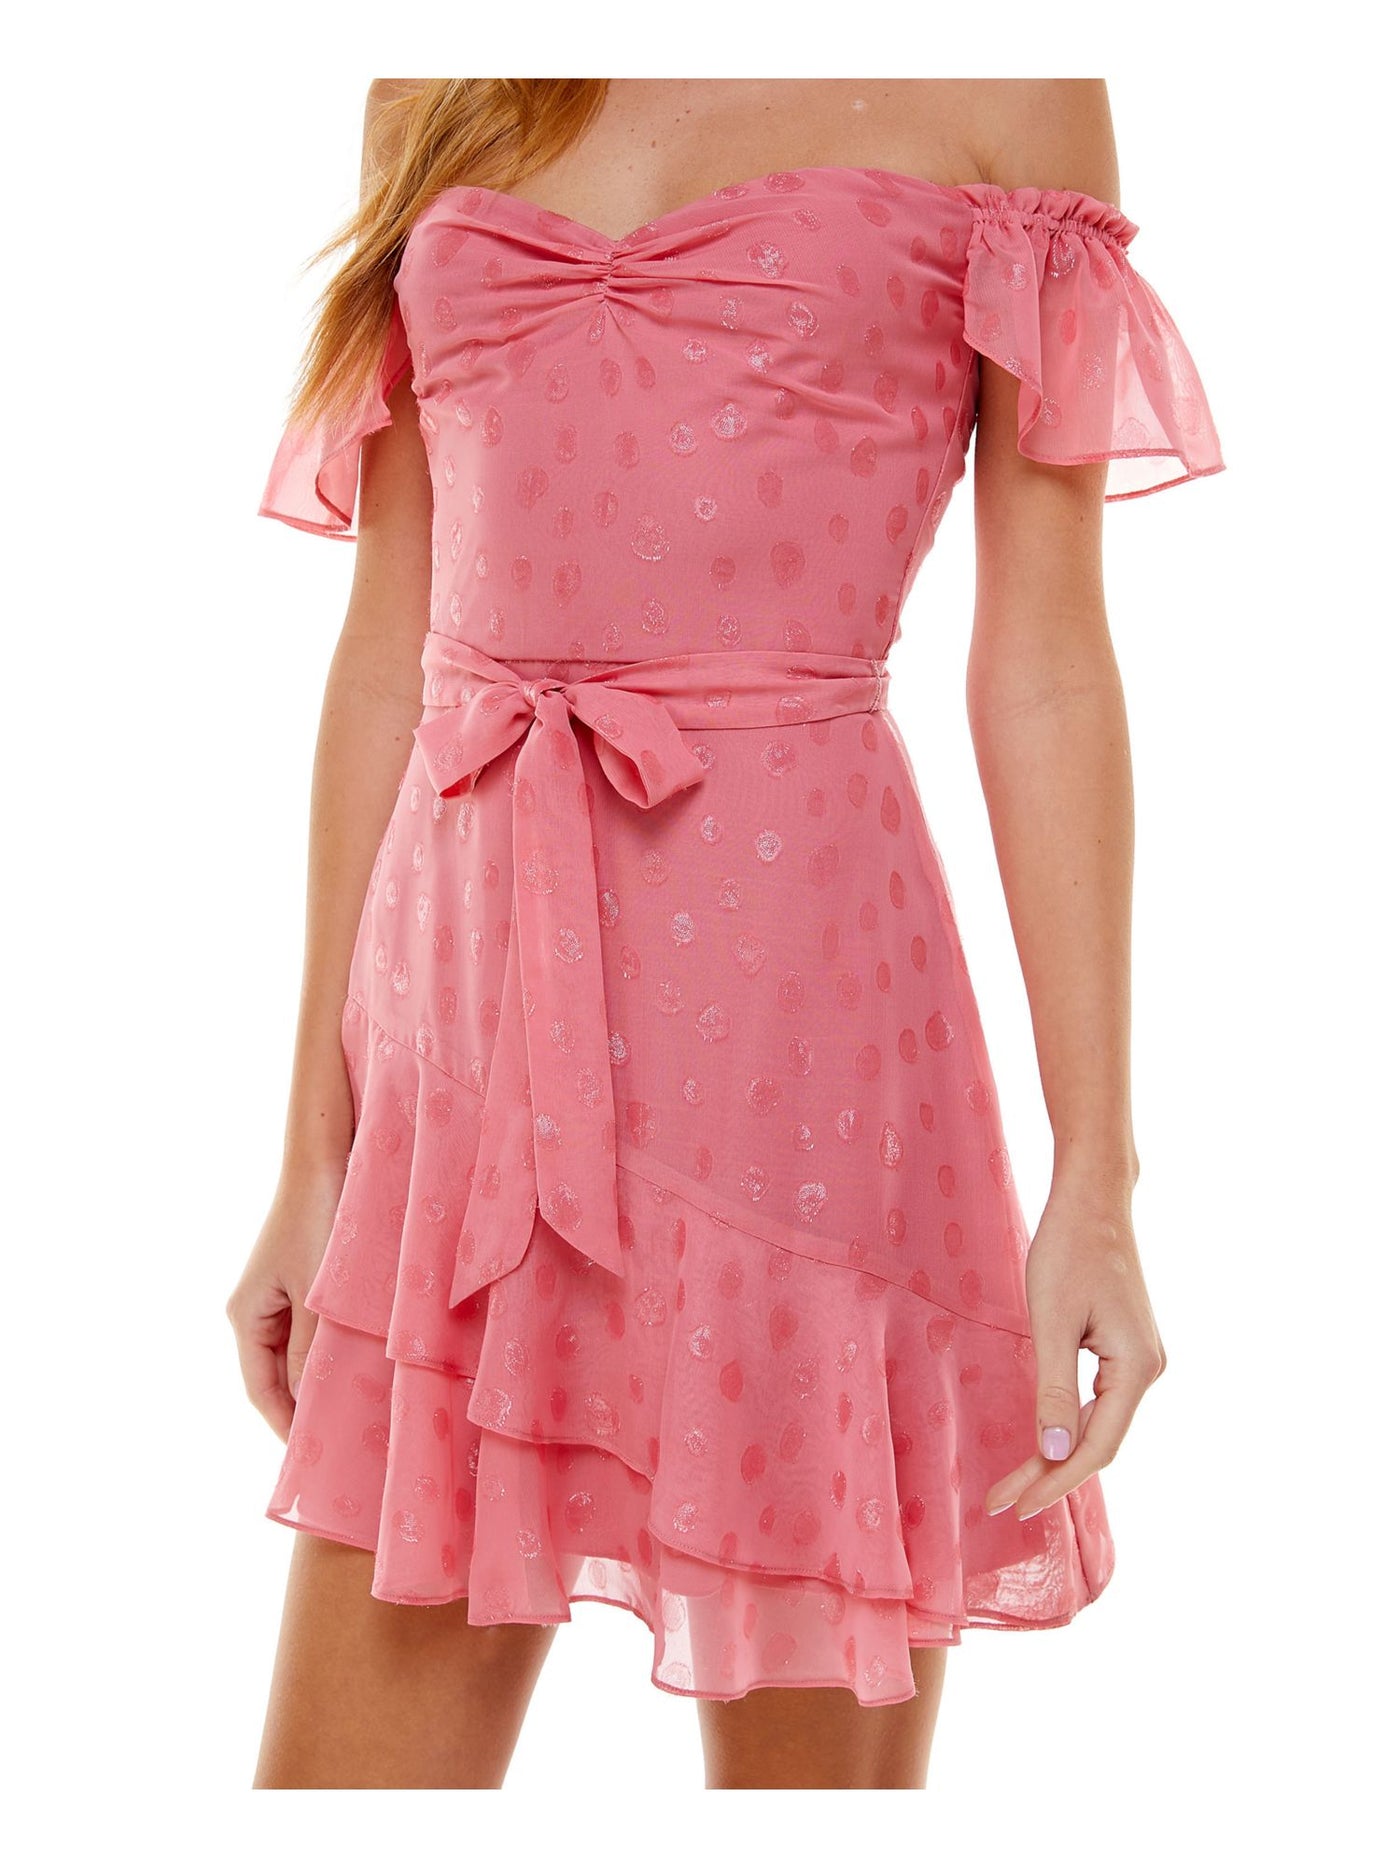 CITY STUDIO Womens Pink Zippered Ruffled Ruched Layered Tie Polka Dot Flutter Sleeve Off Shoulder Short Party Fit + Flare Dress Juniors 11